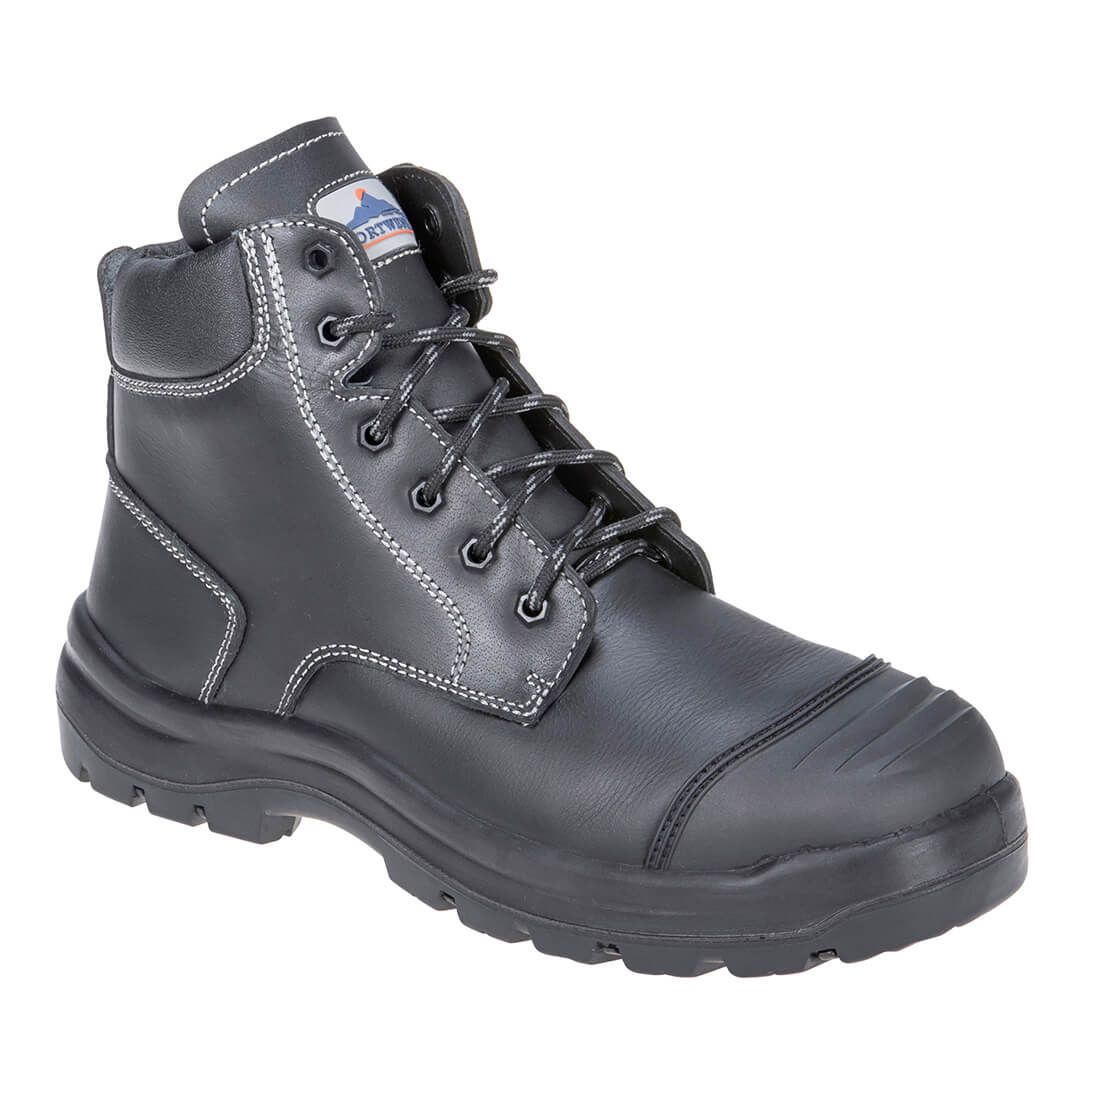 Image of Portwest Mens Clyde Safety Boots Black Size 10